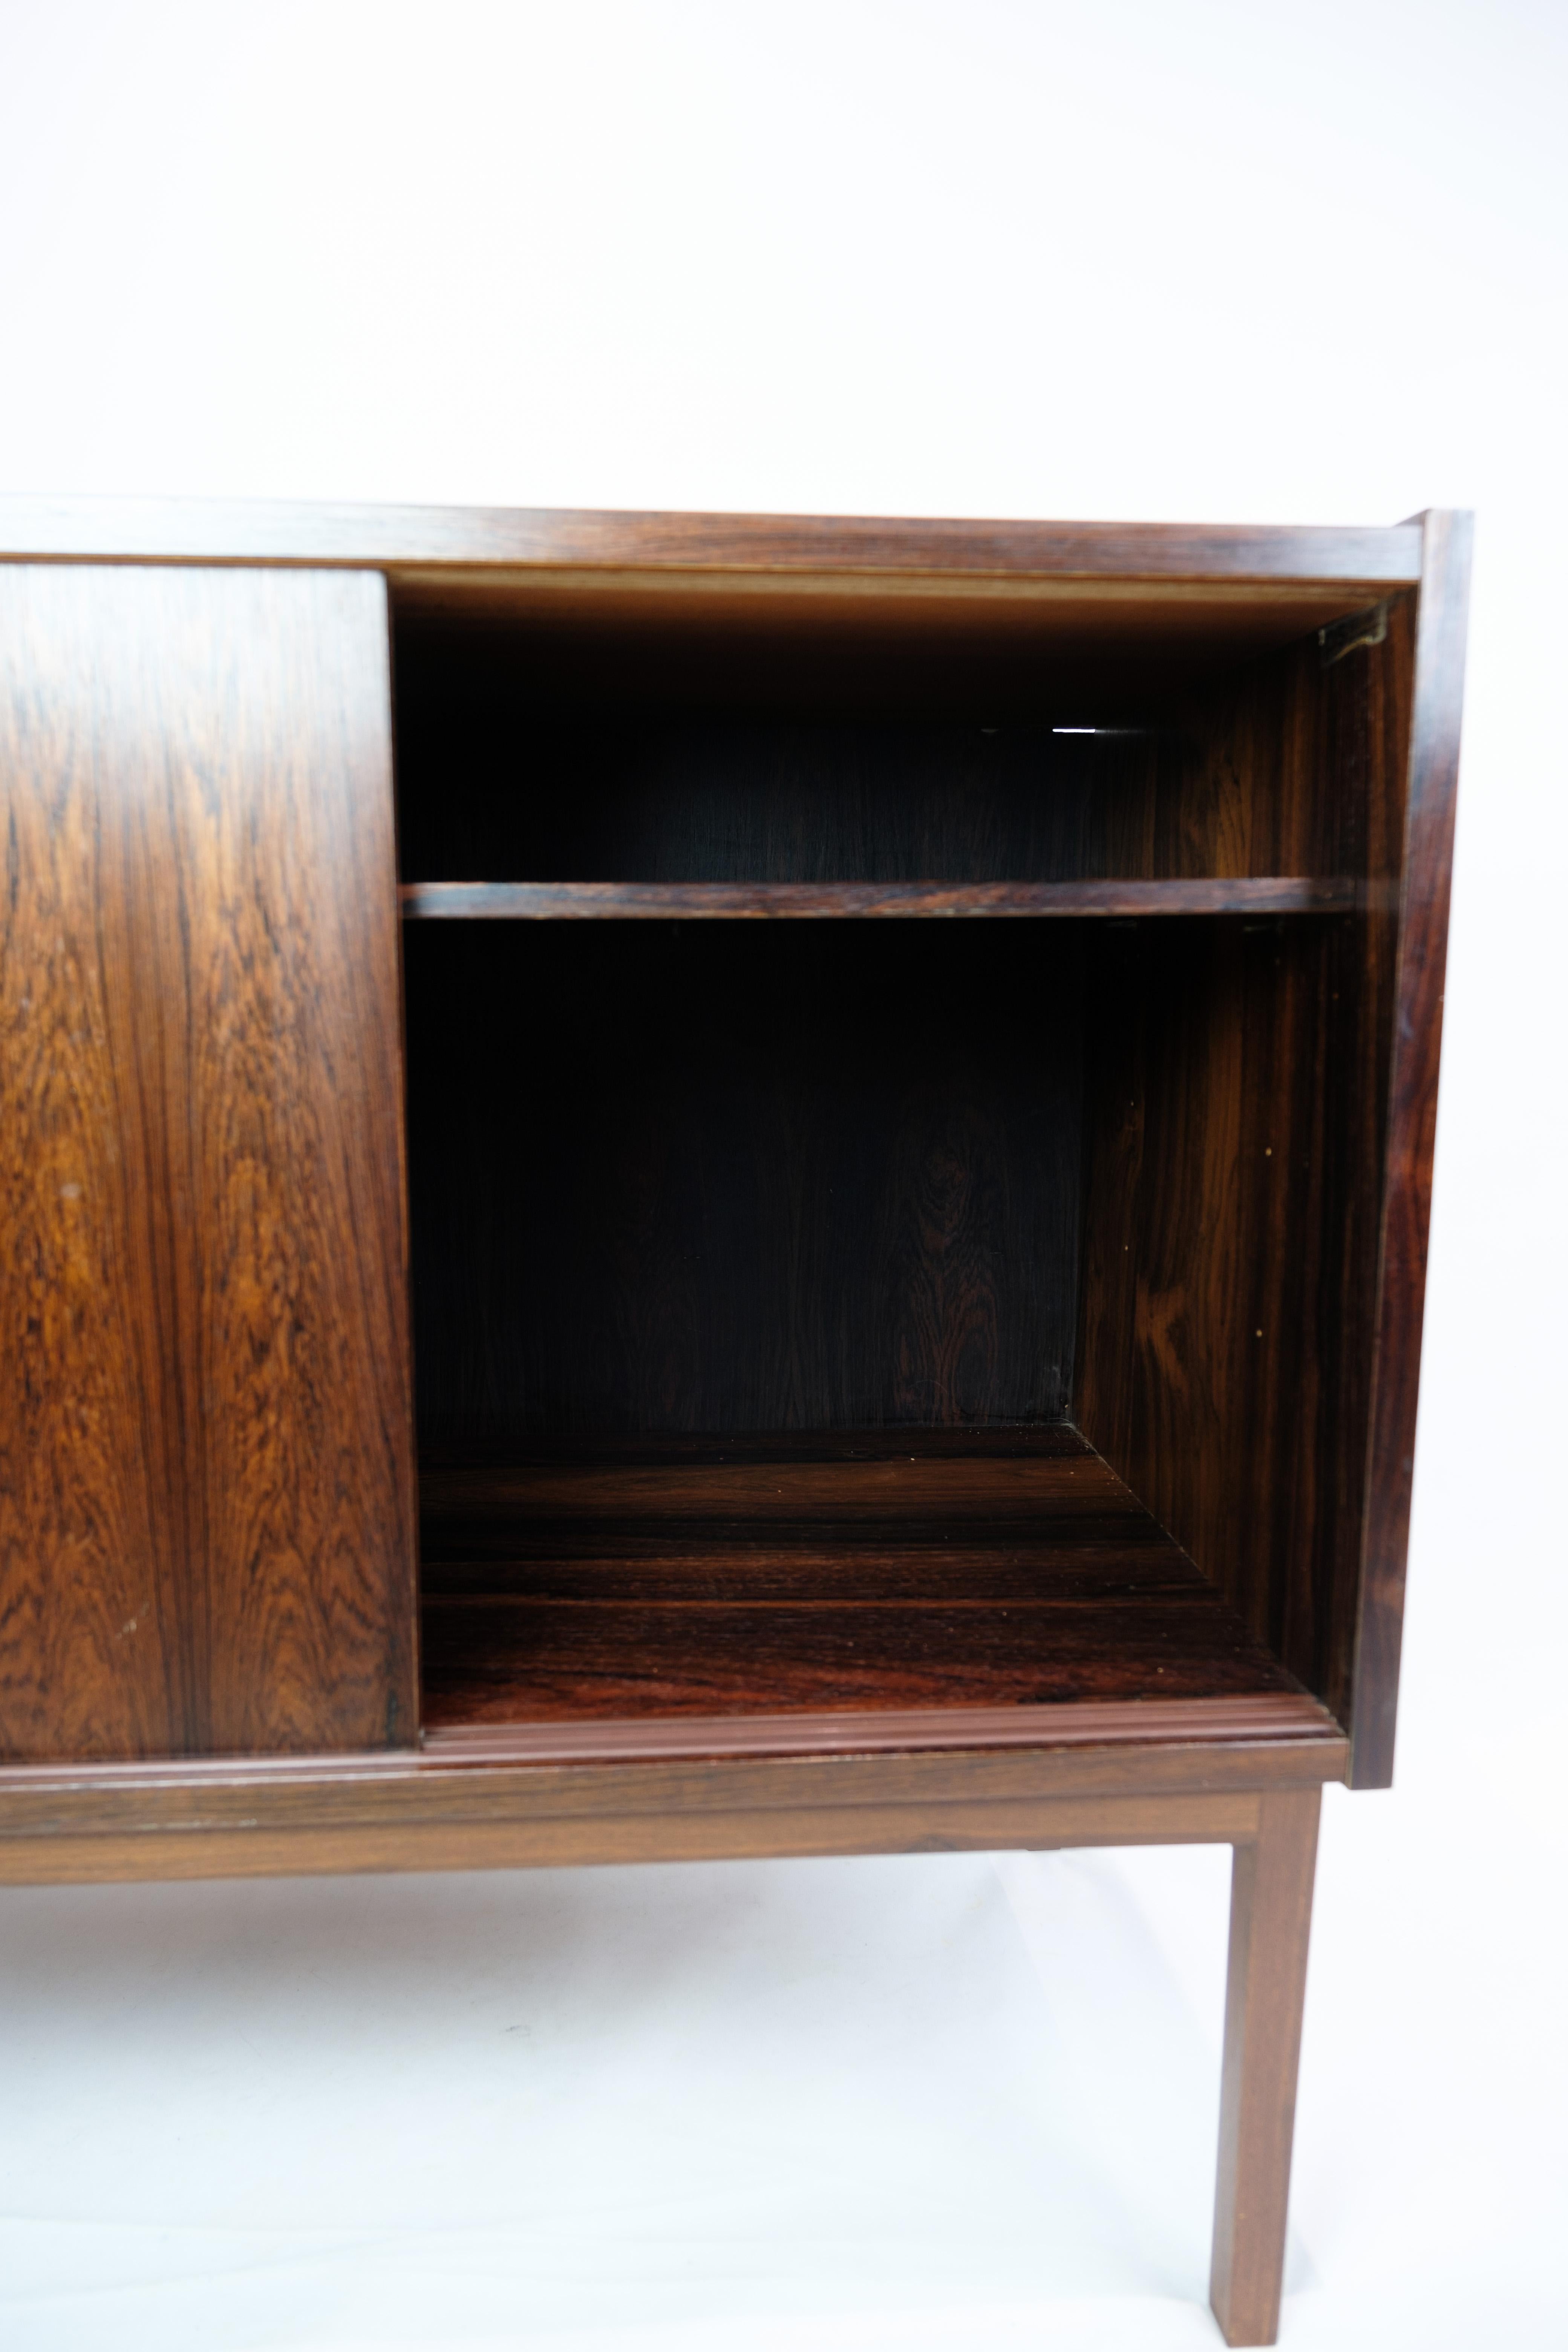 Mid-20th Century Sideboard With Shelves Made In Rosewood, Danish Design From 1960s For Sale